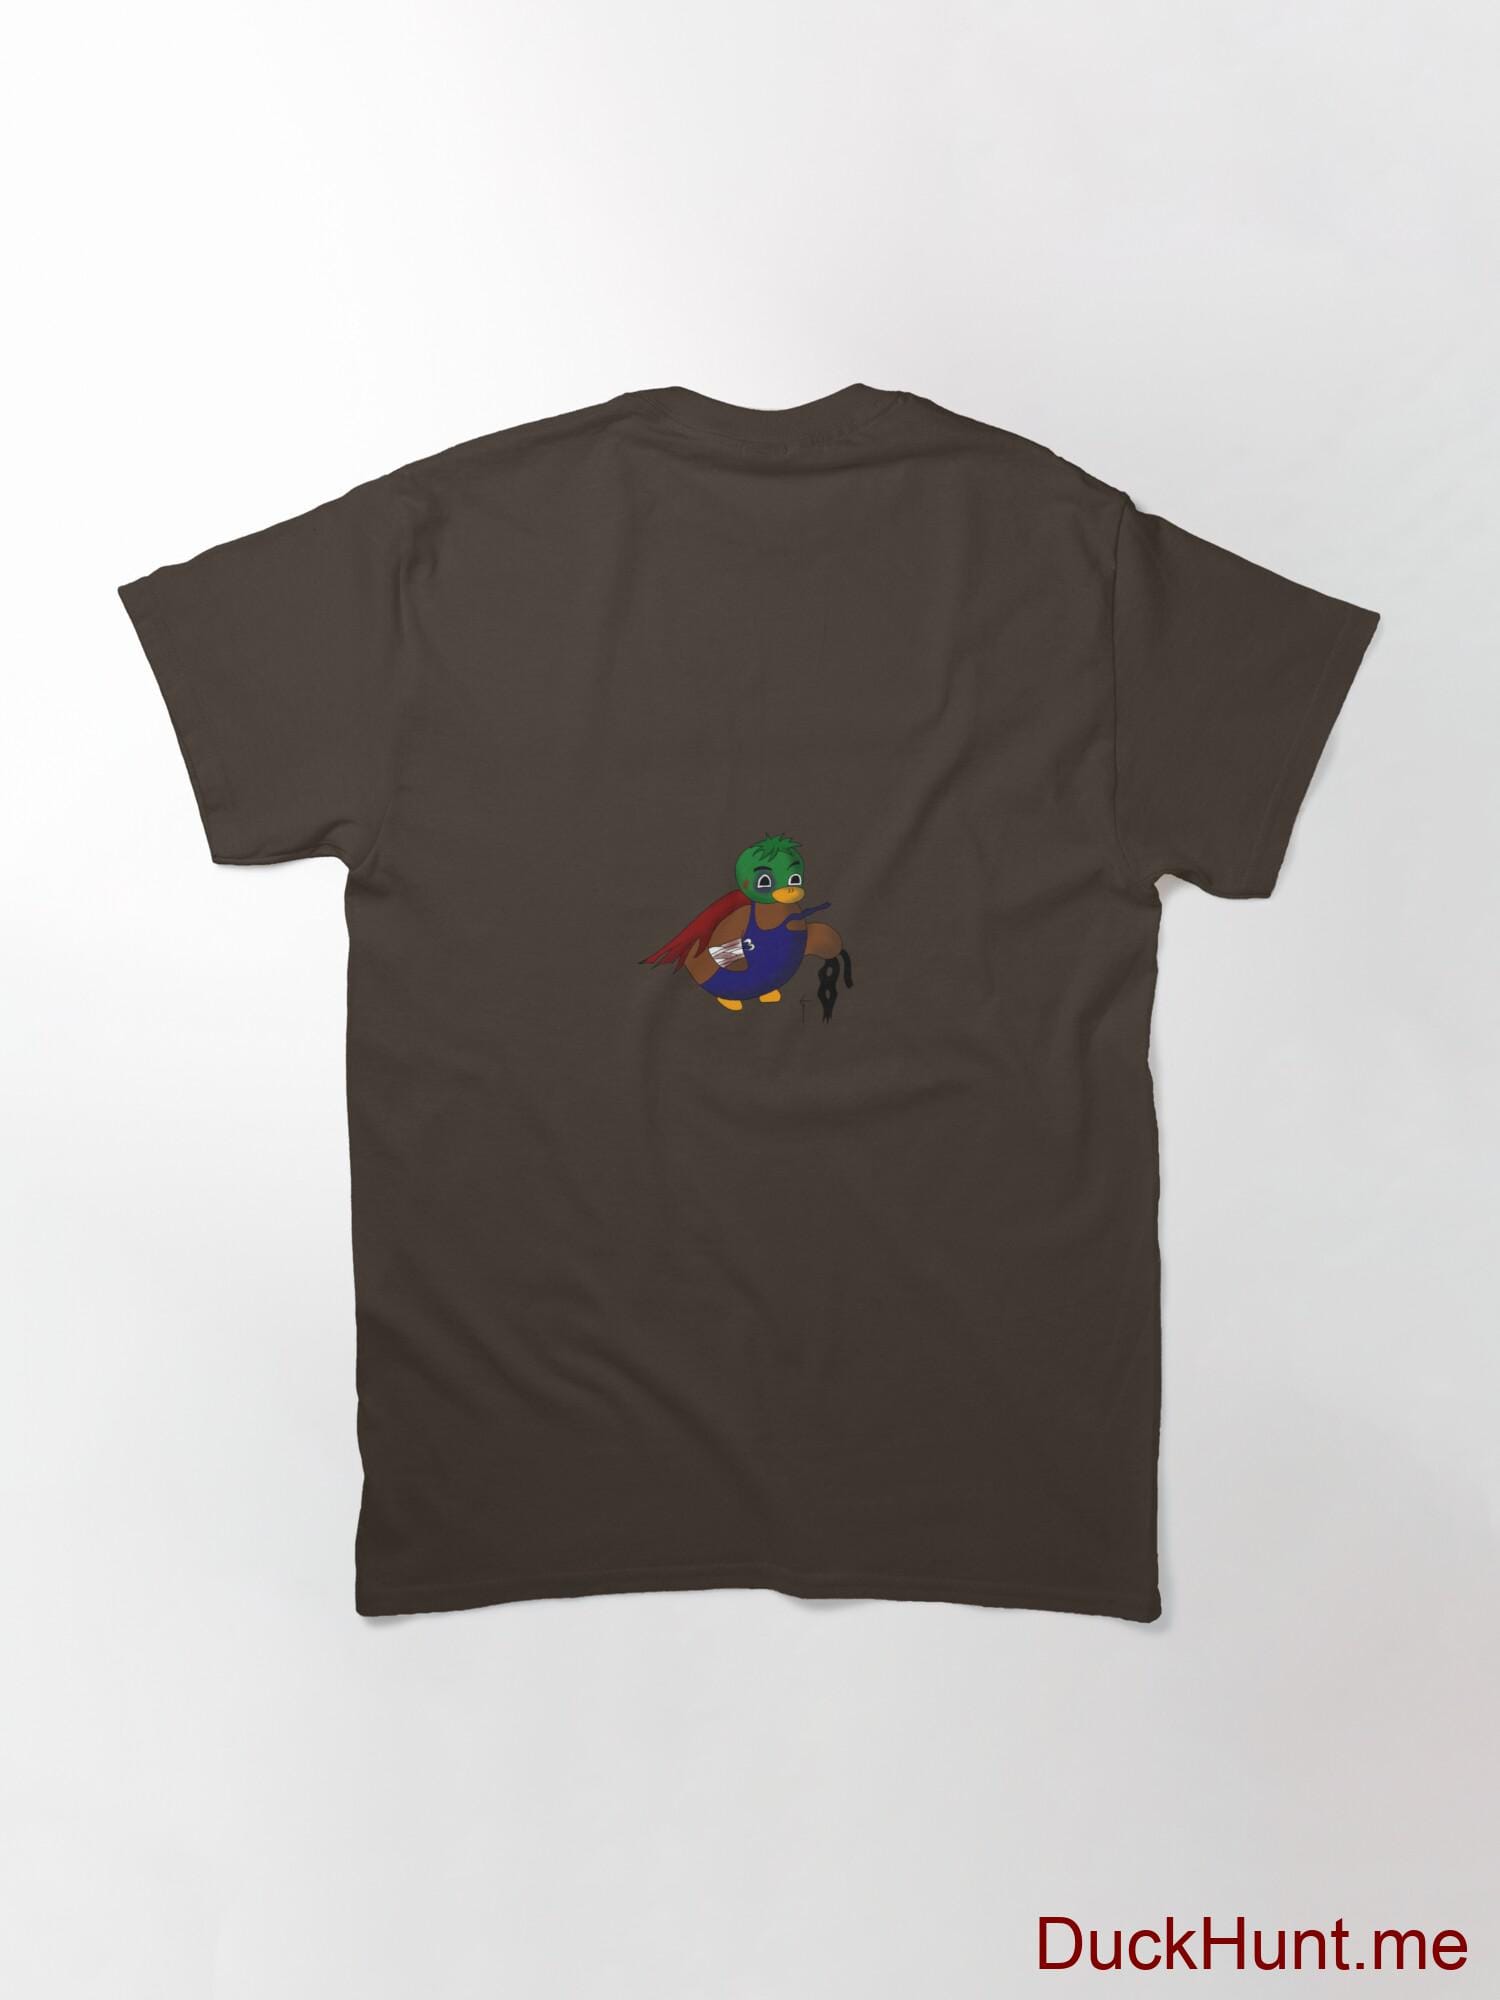 Dead DuckHunt Boss (smokeless) Brown Classic T-Shirt (Back printed) alternative image 1